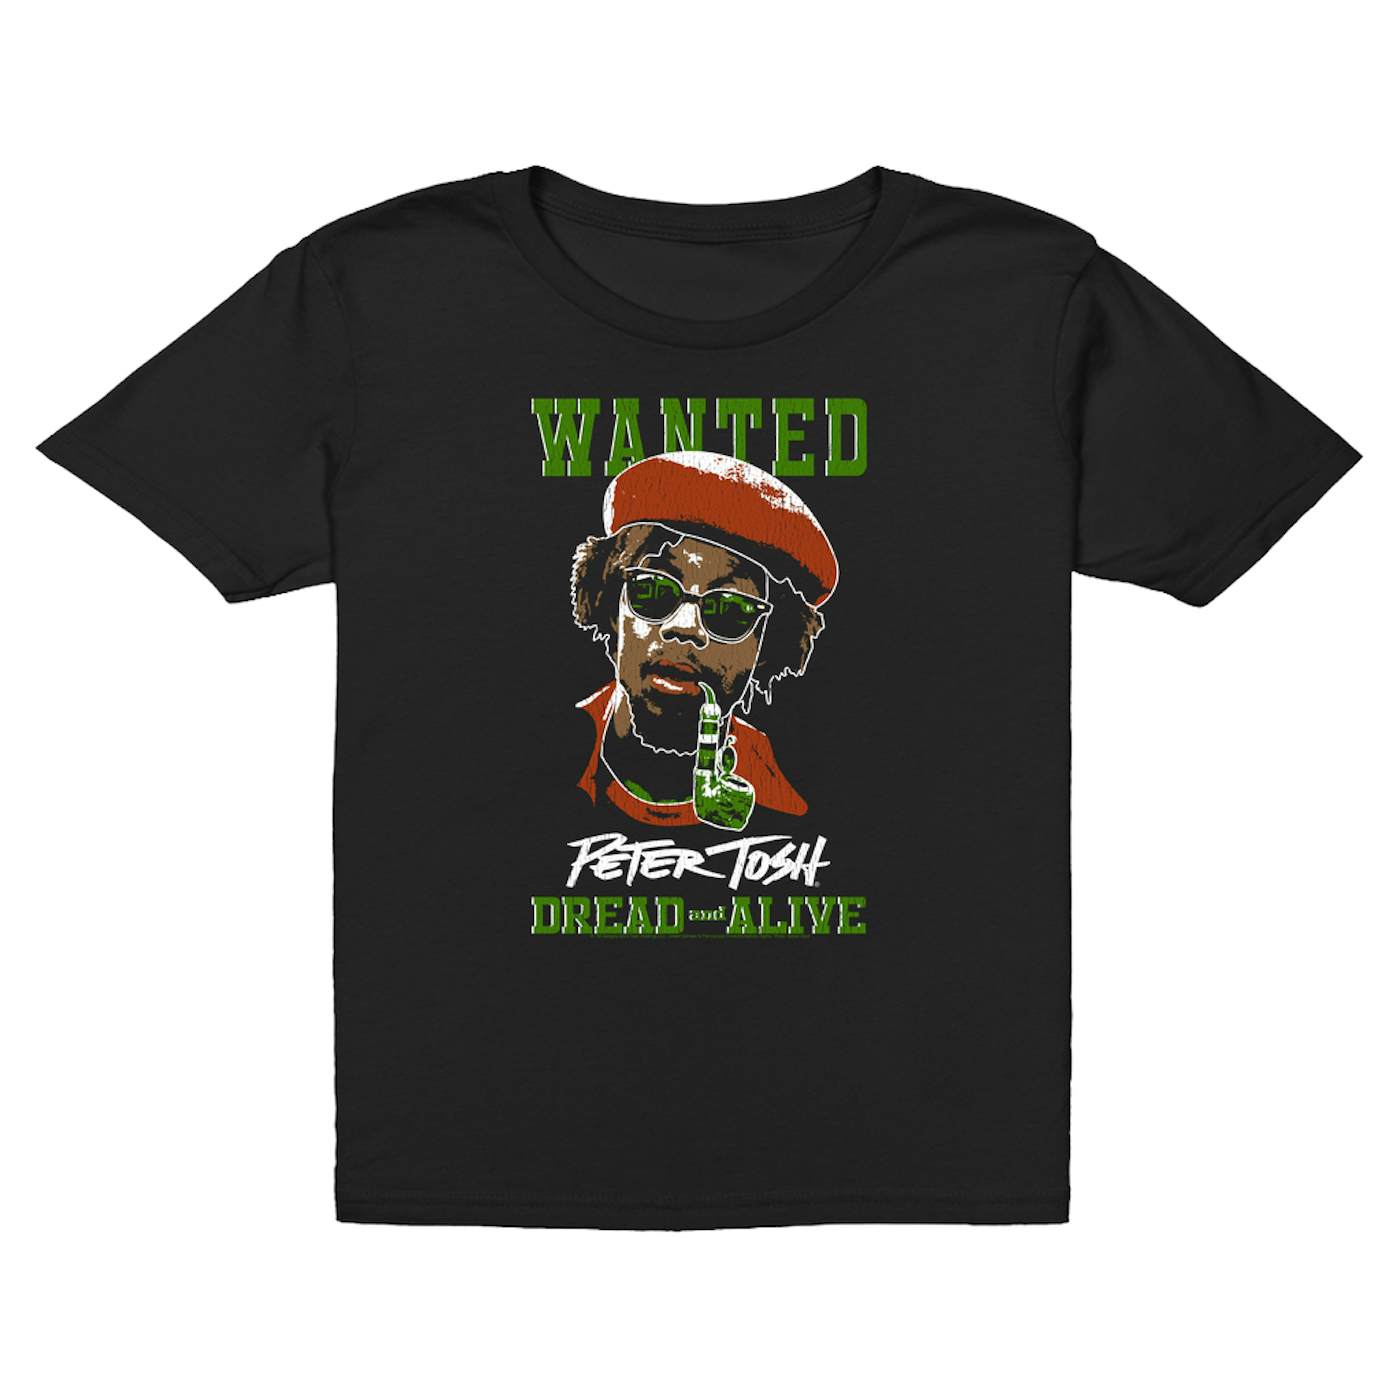 Peter Tosh Kids T-Shirt | Wanted Dread And Live (Merchbar Exclusive) Peter Tosh Kids T-Shirt